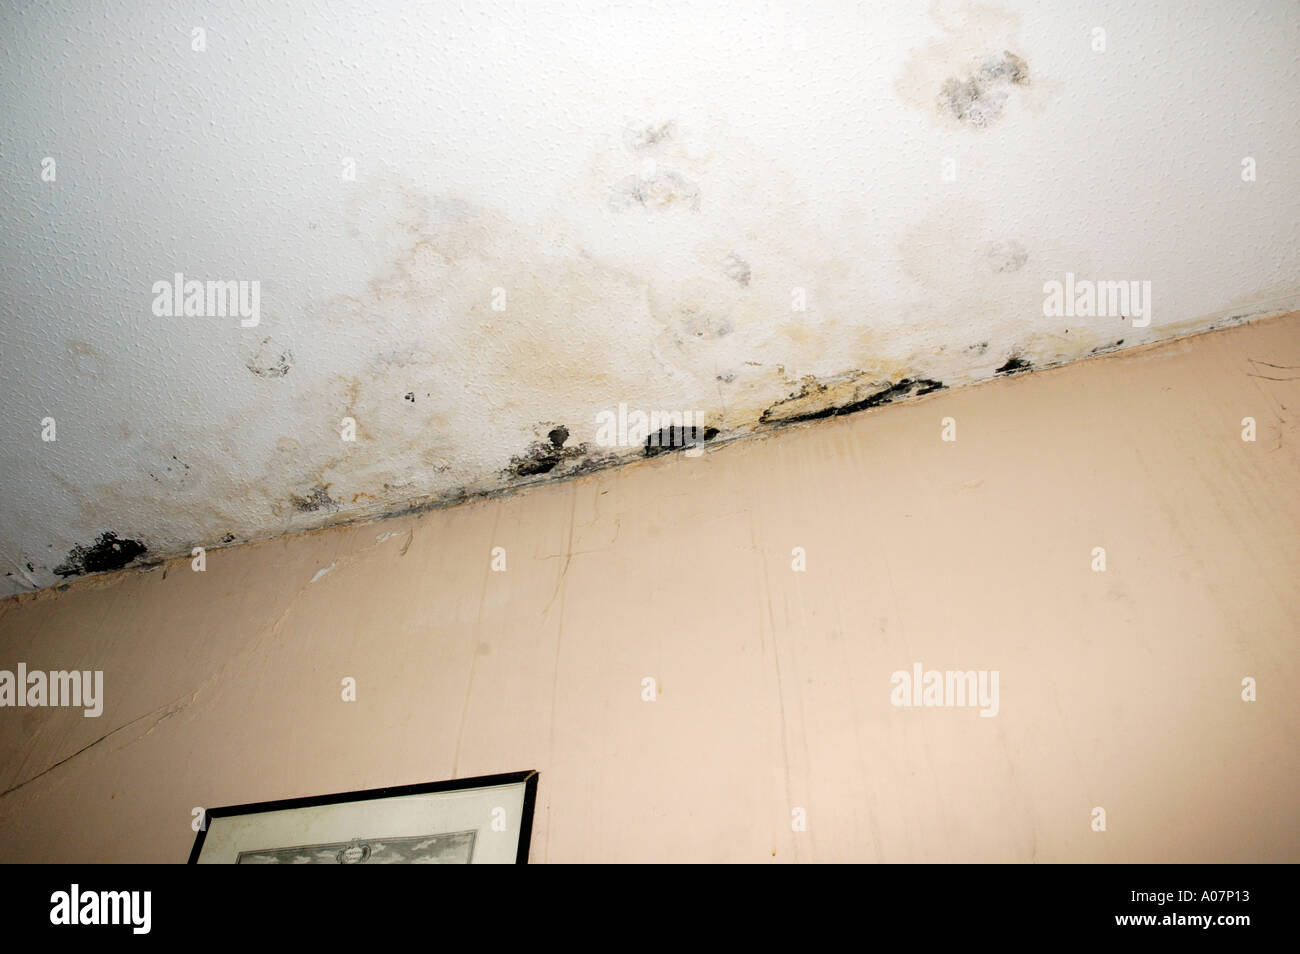 Mould growth and plaster cracking on ceiling and walls probably due to  water penetration through parapet and condensation Stock Photo - Alamy